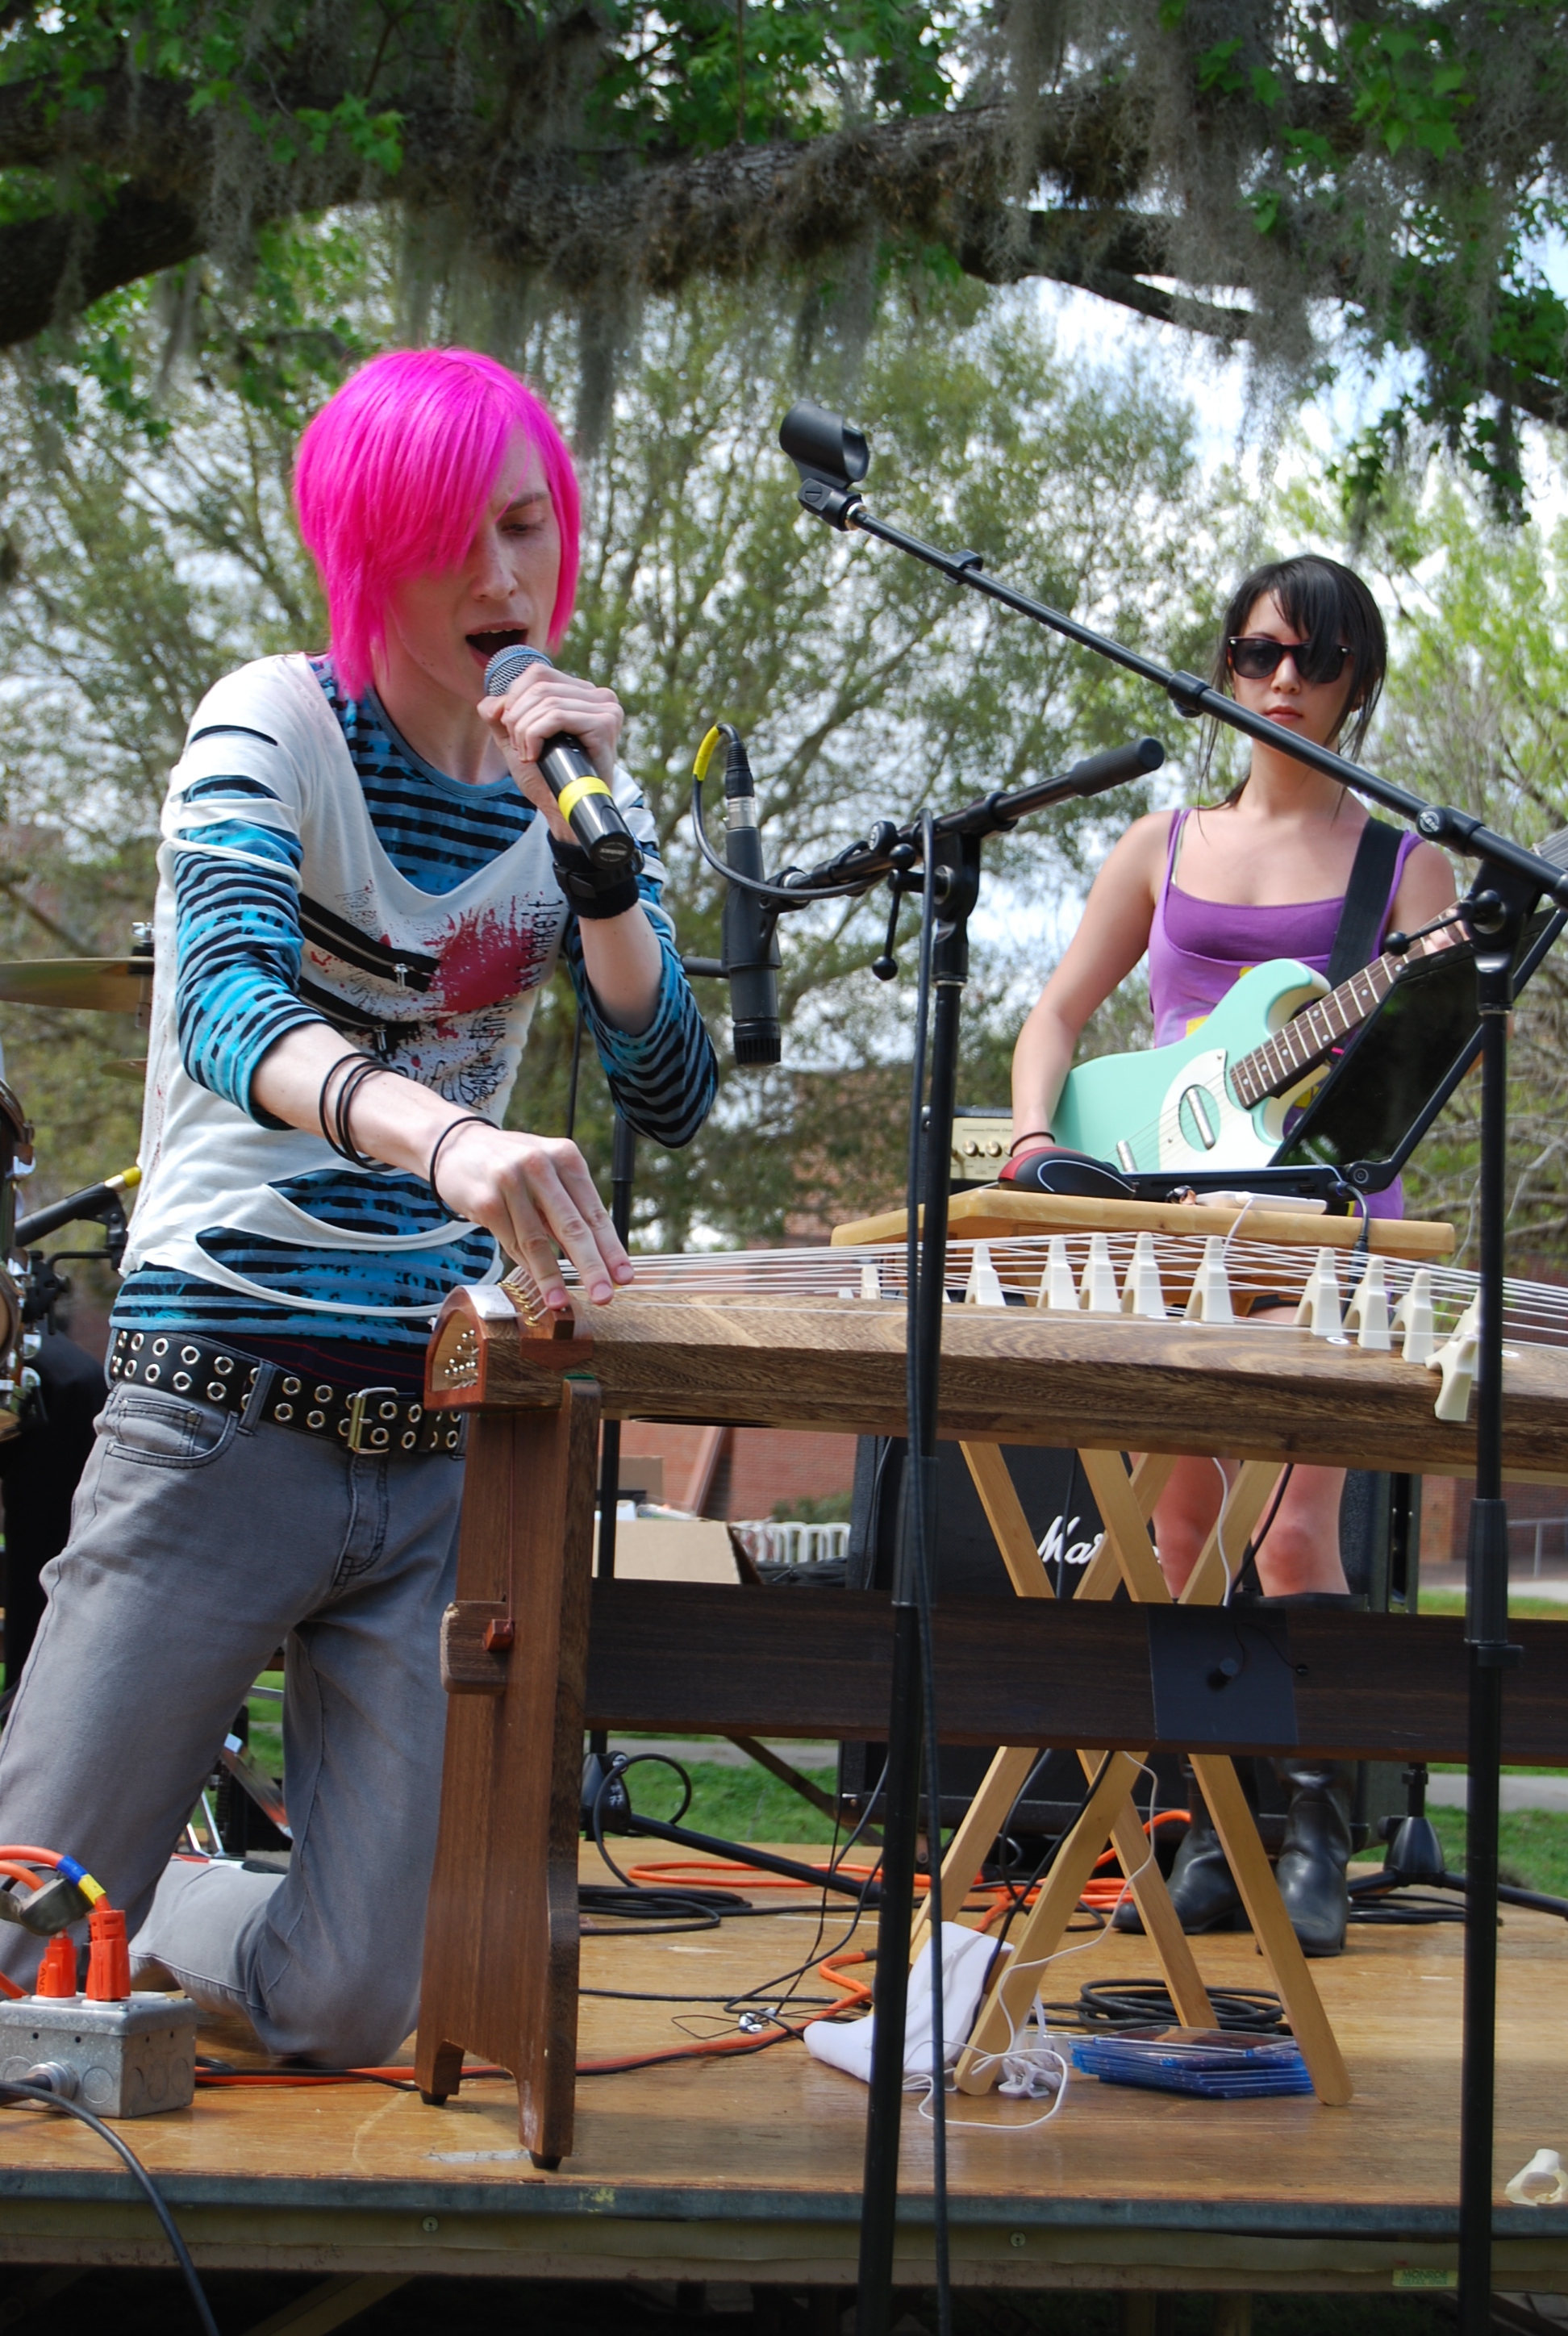 Japanese Club Spring Festival at University of Florida (photo by Gonzalo Escarate. Kelly Tran on guitar)